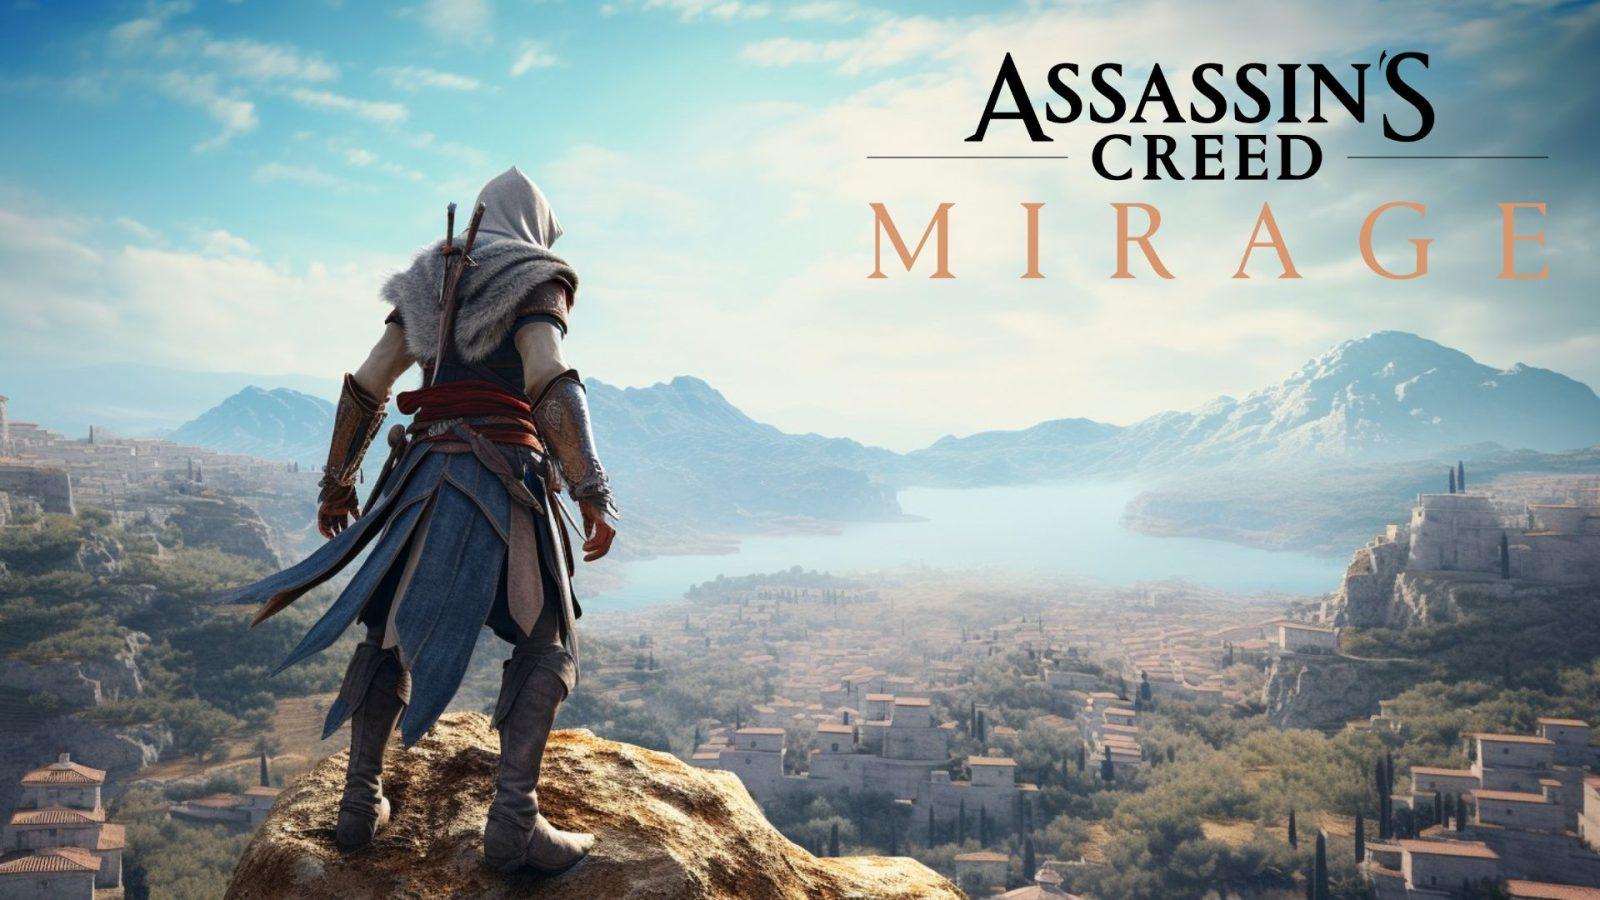 Does Assassin's Creed Mirage have cross-progression? - Dexerto